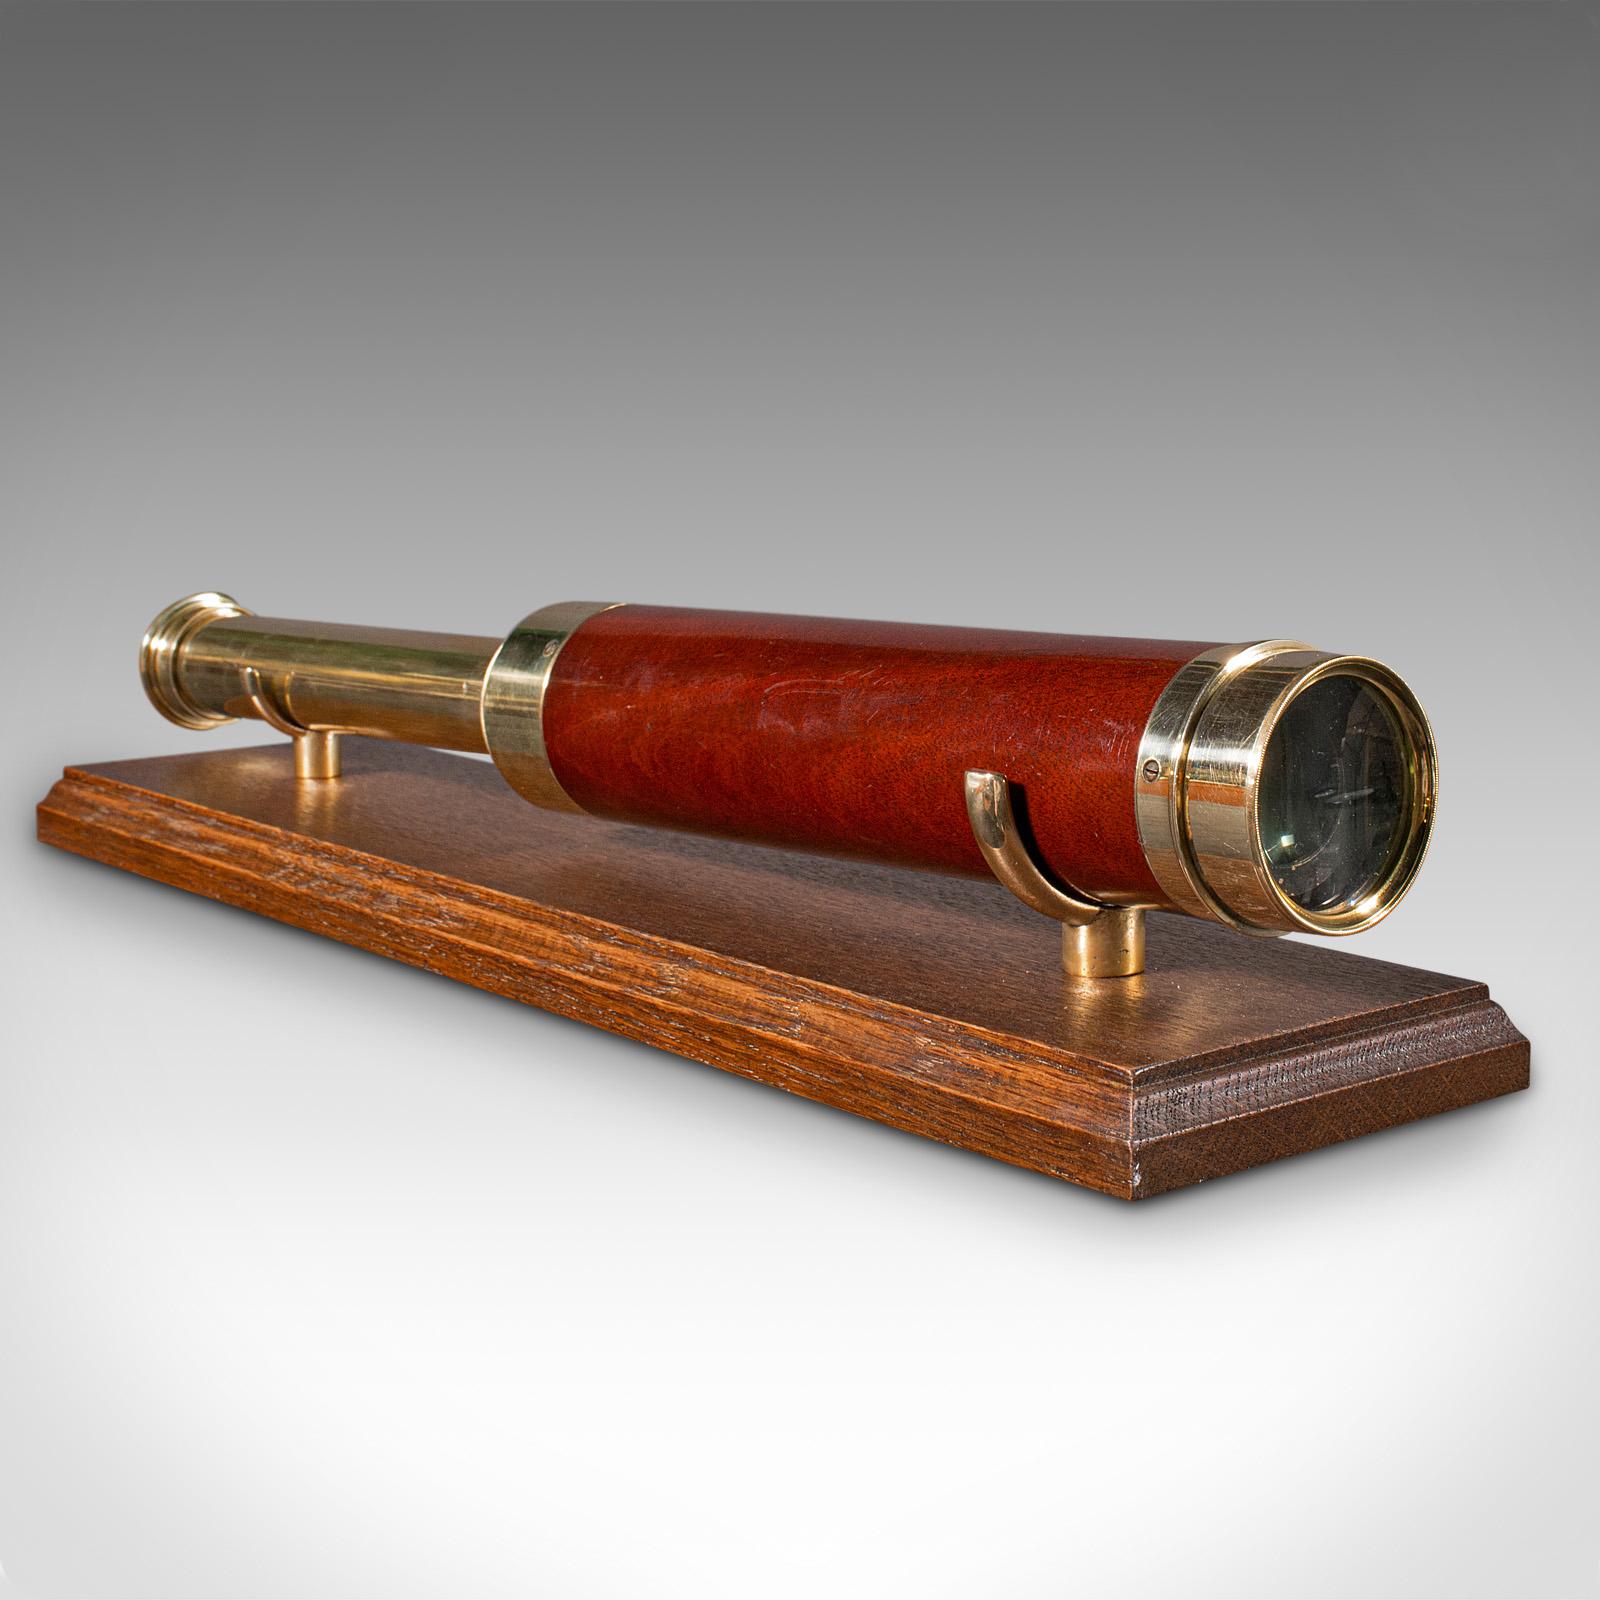 19th Century Antique 3 Draw Telescope, English Terrestrial, Leather Case, Jp Cutts, Victorian